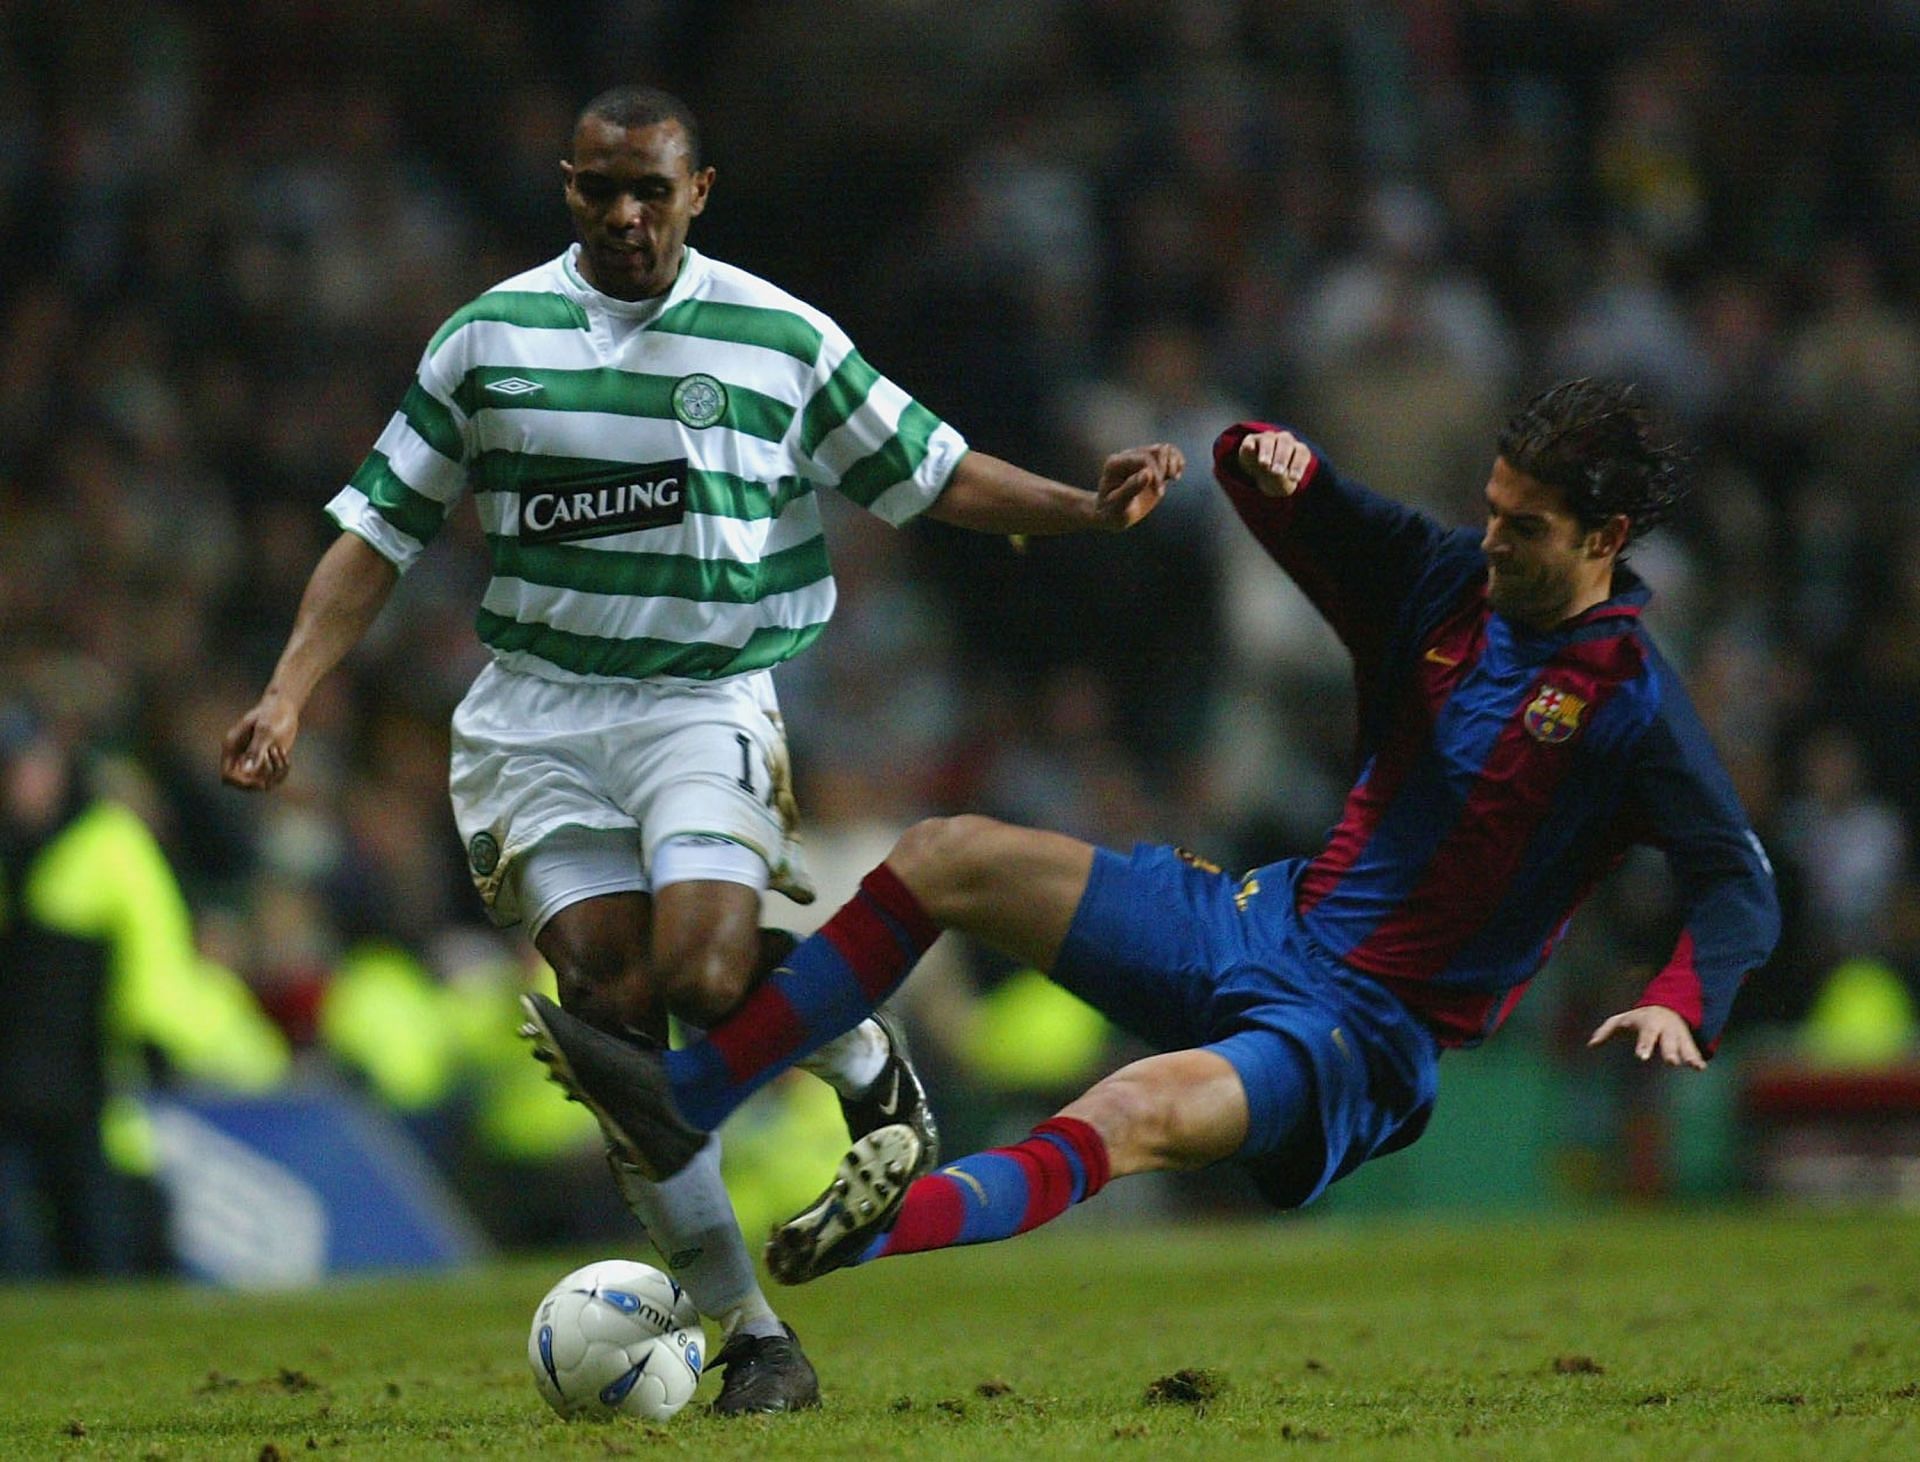 Lopez (right) challenges for the ball in UEFA Cup 4th round game vs Celtic